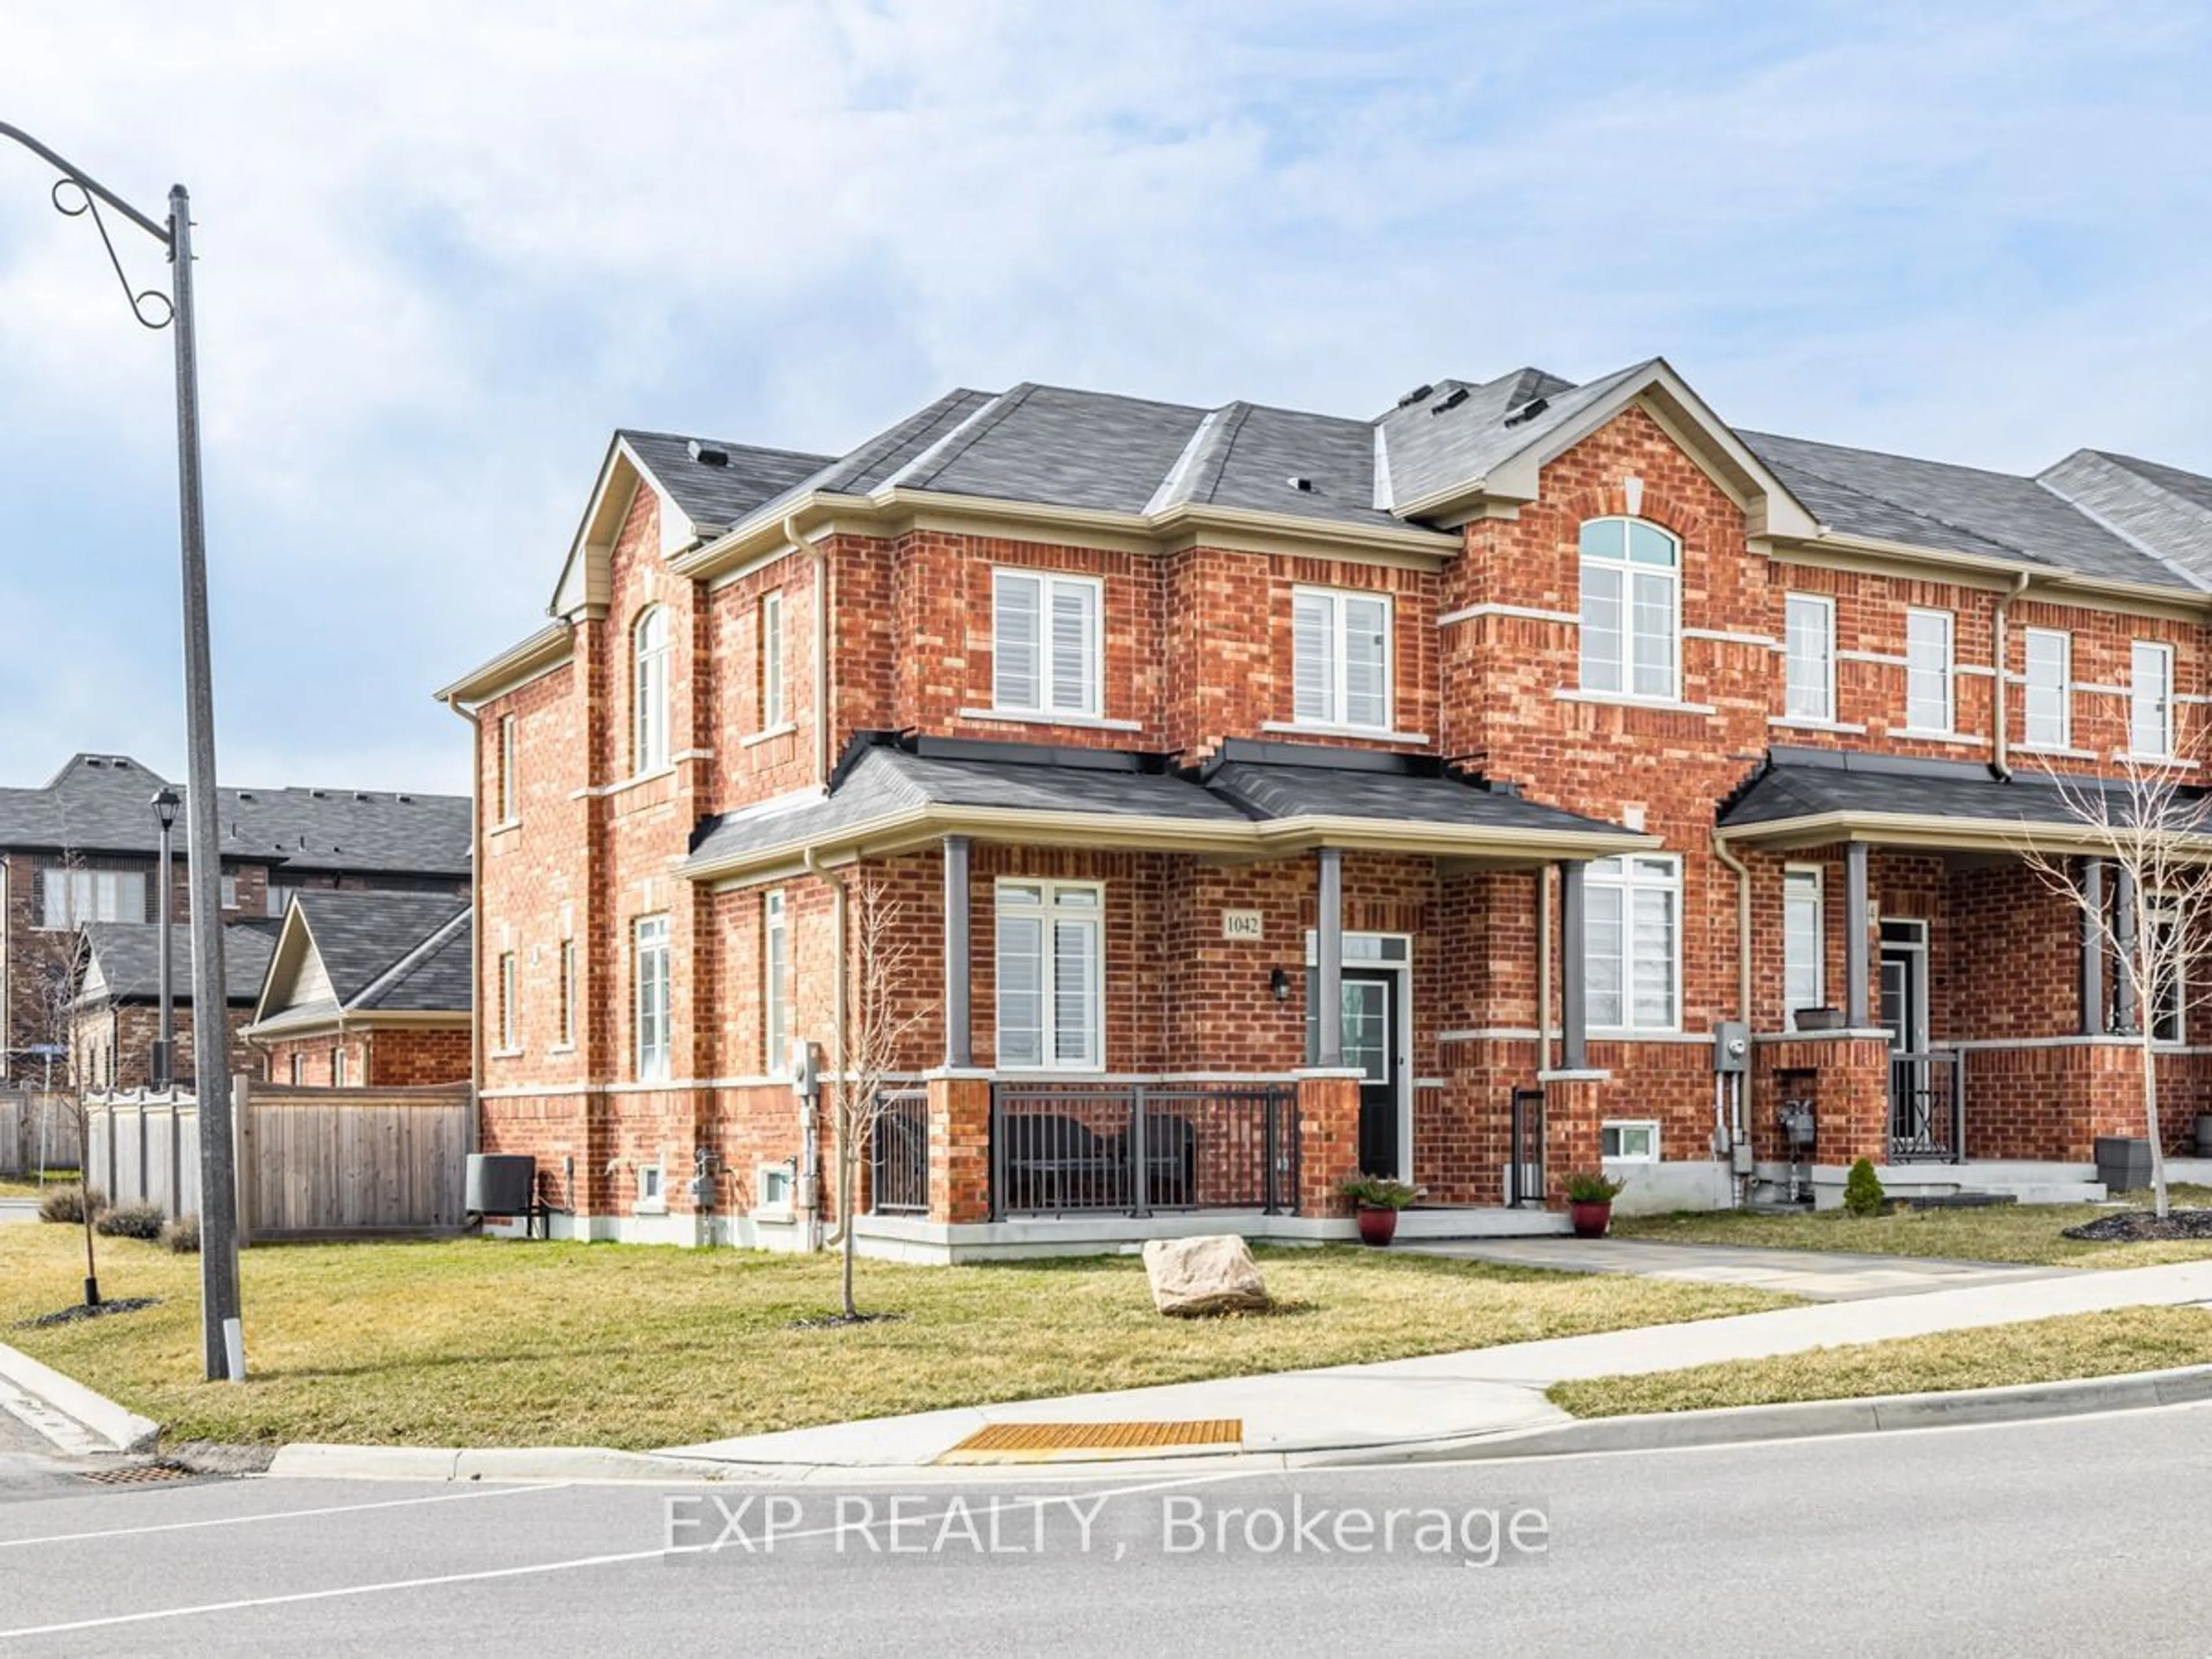 Home with brick exterior material for 1042 Murrell Blvd, East Gwillimbury Ontario L9N 0X8